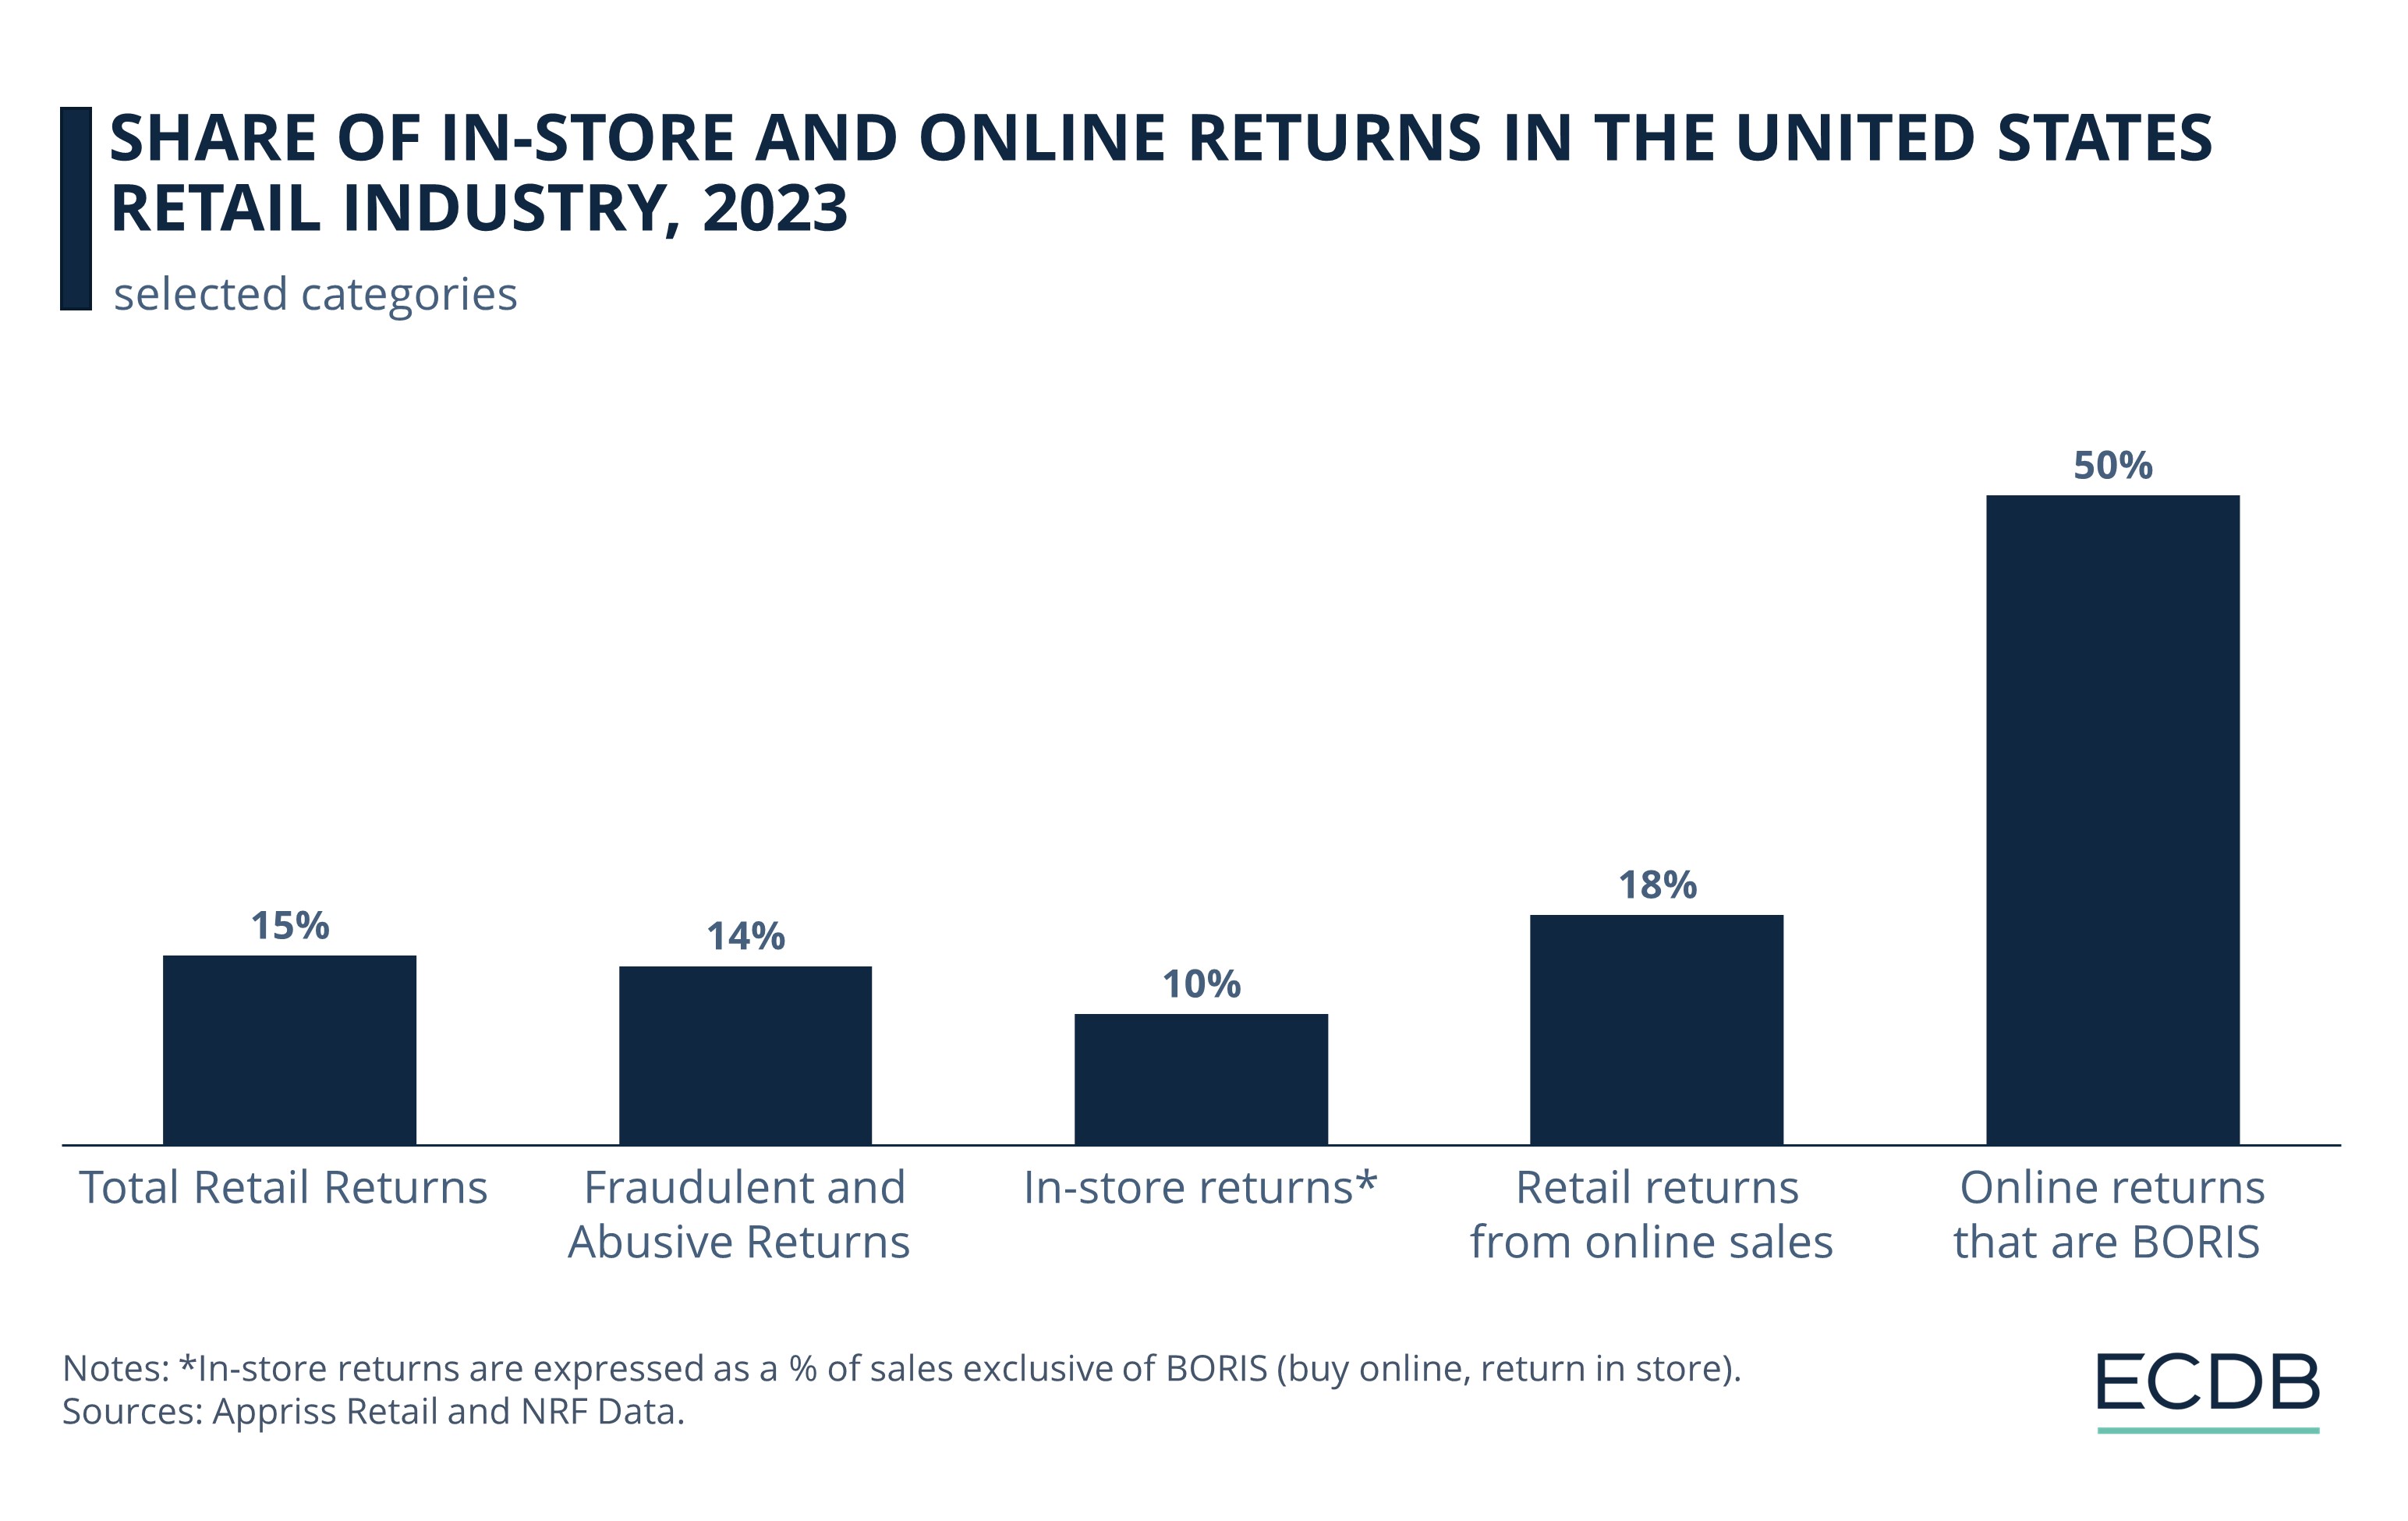 Share of In-Store and Online Returns in the United States Retail Industry, 2023